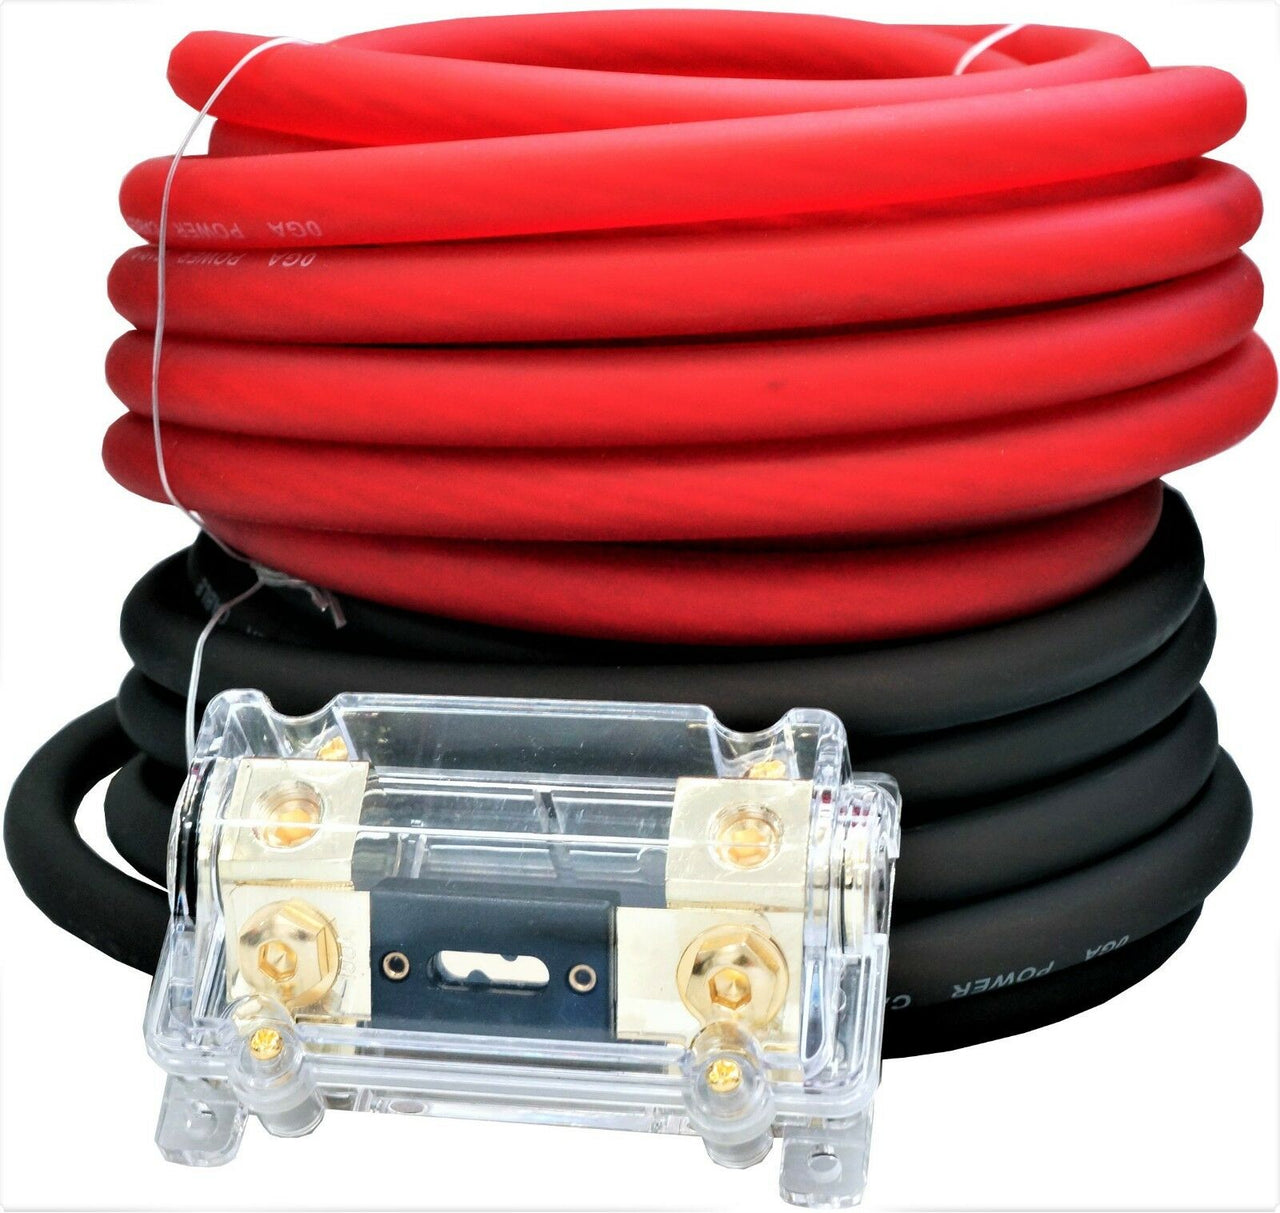 MK Audio MKIT025RB 0 Gauge Wire Red / Black Amplifier Amp Power/Ground Cable 1/0 Set - Free Fuse